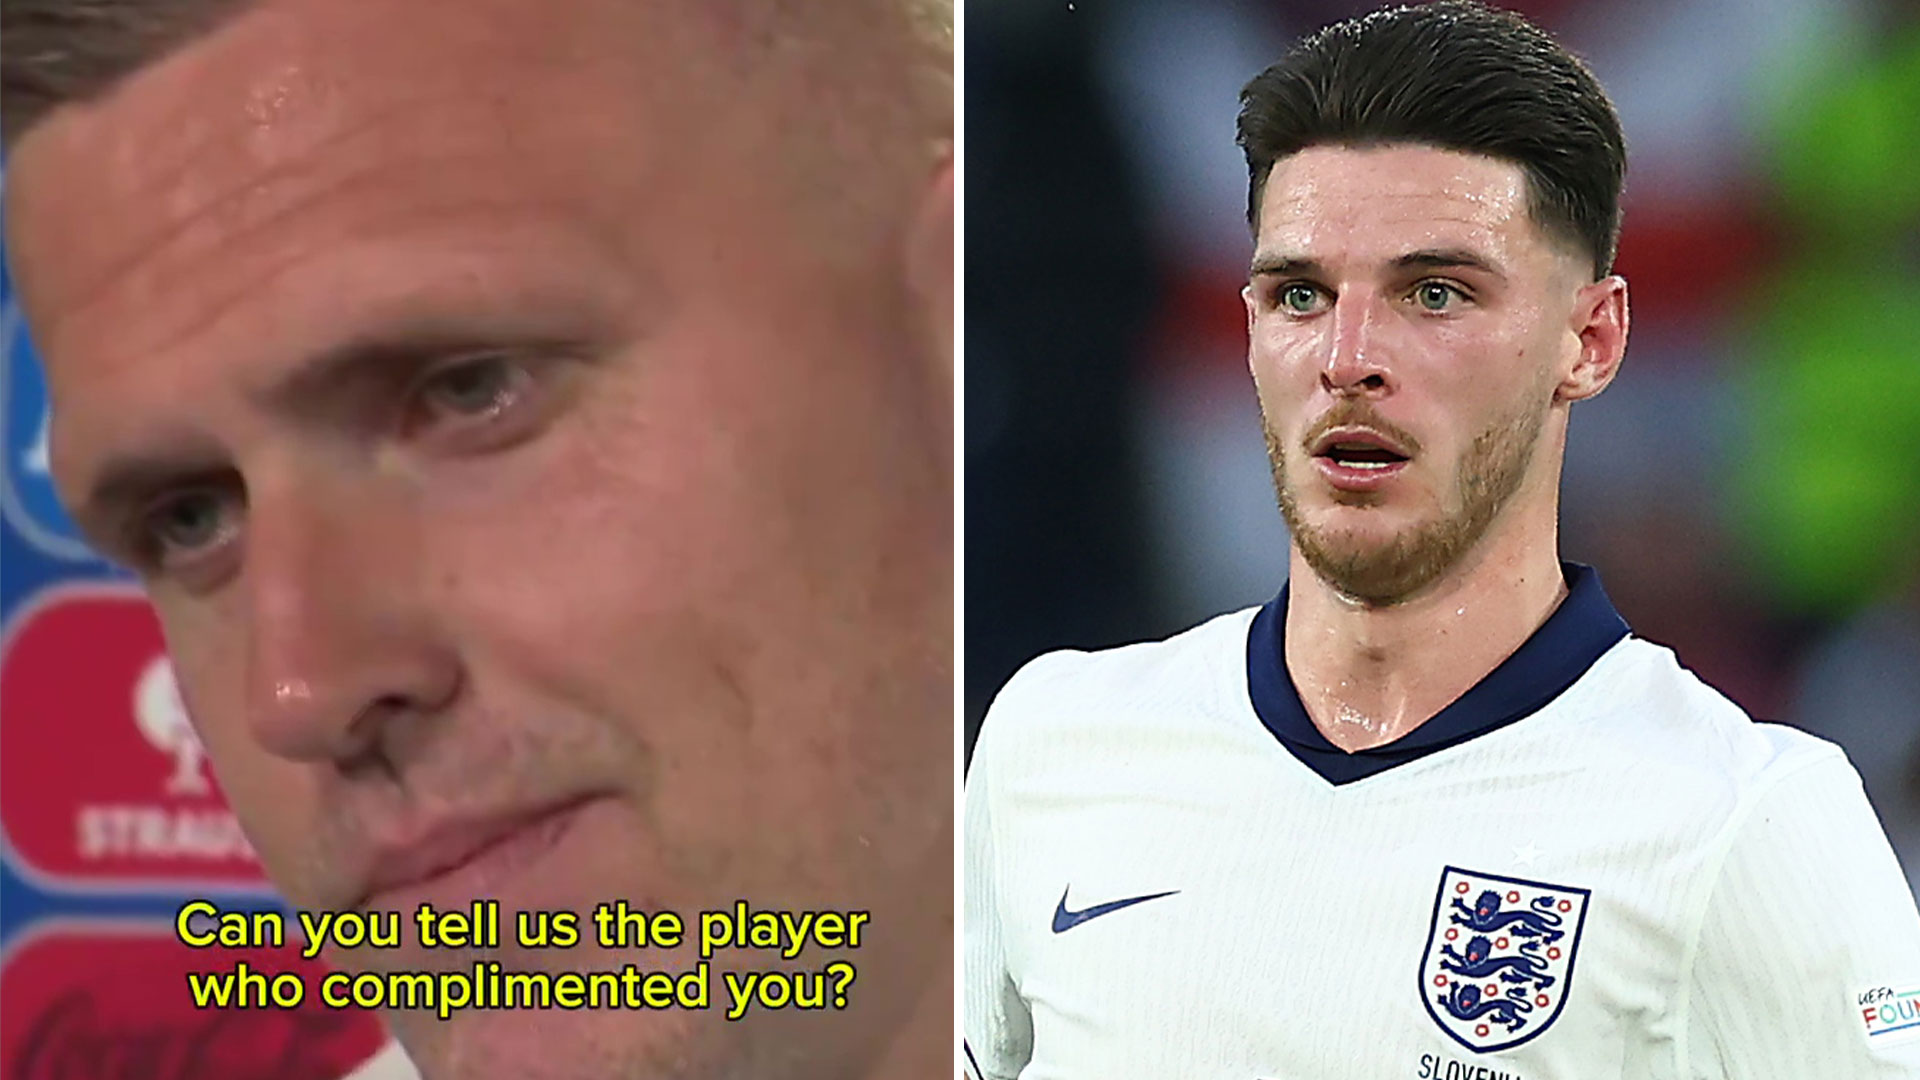 Slovenia star who suffered with depression reveals heartwarming moment with Declan Rice before England clash [Video]